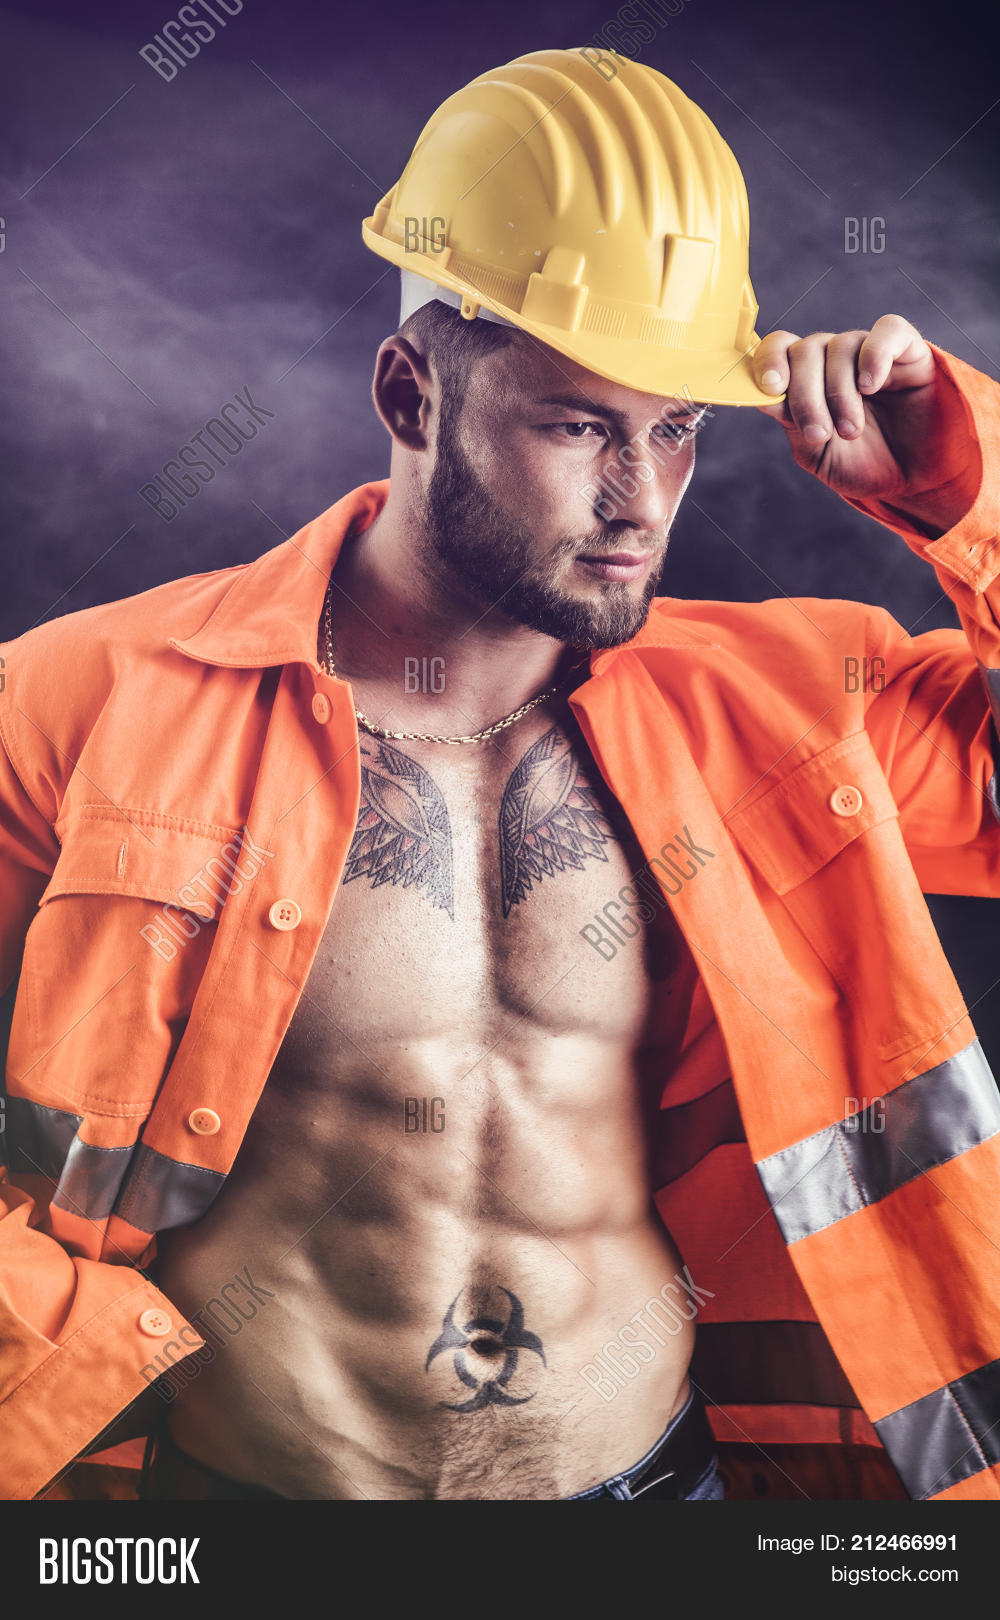 butterscotch williams add naked construction worker photo